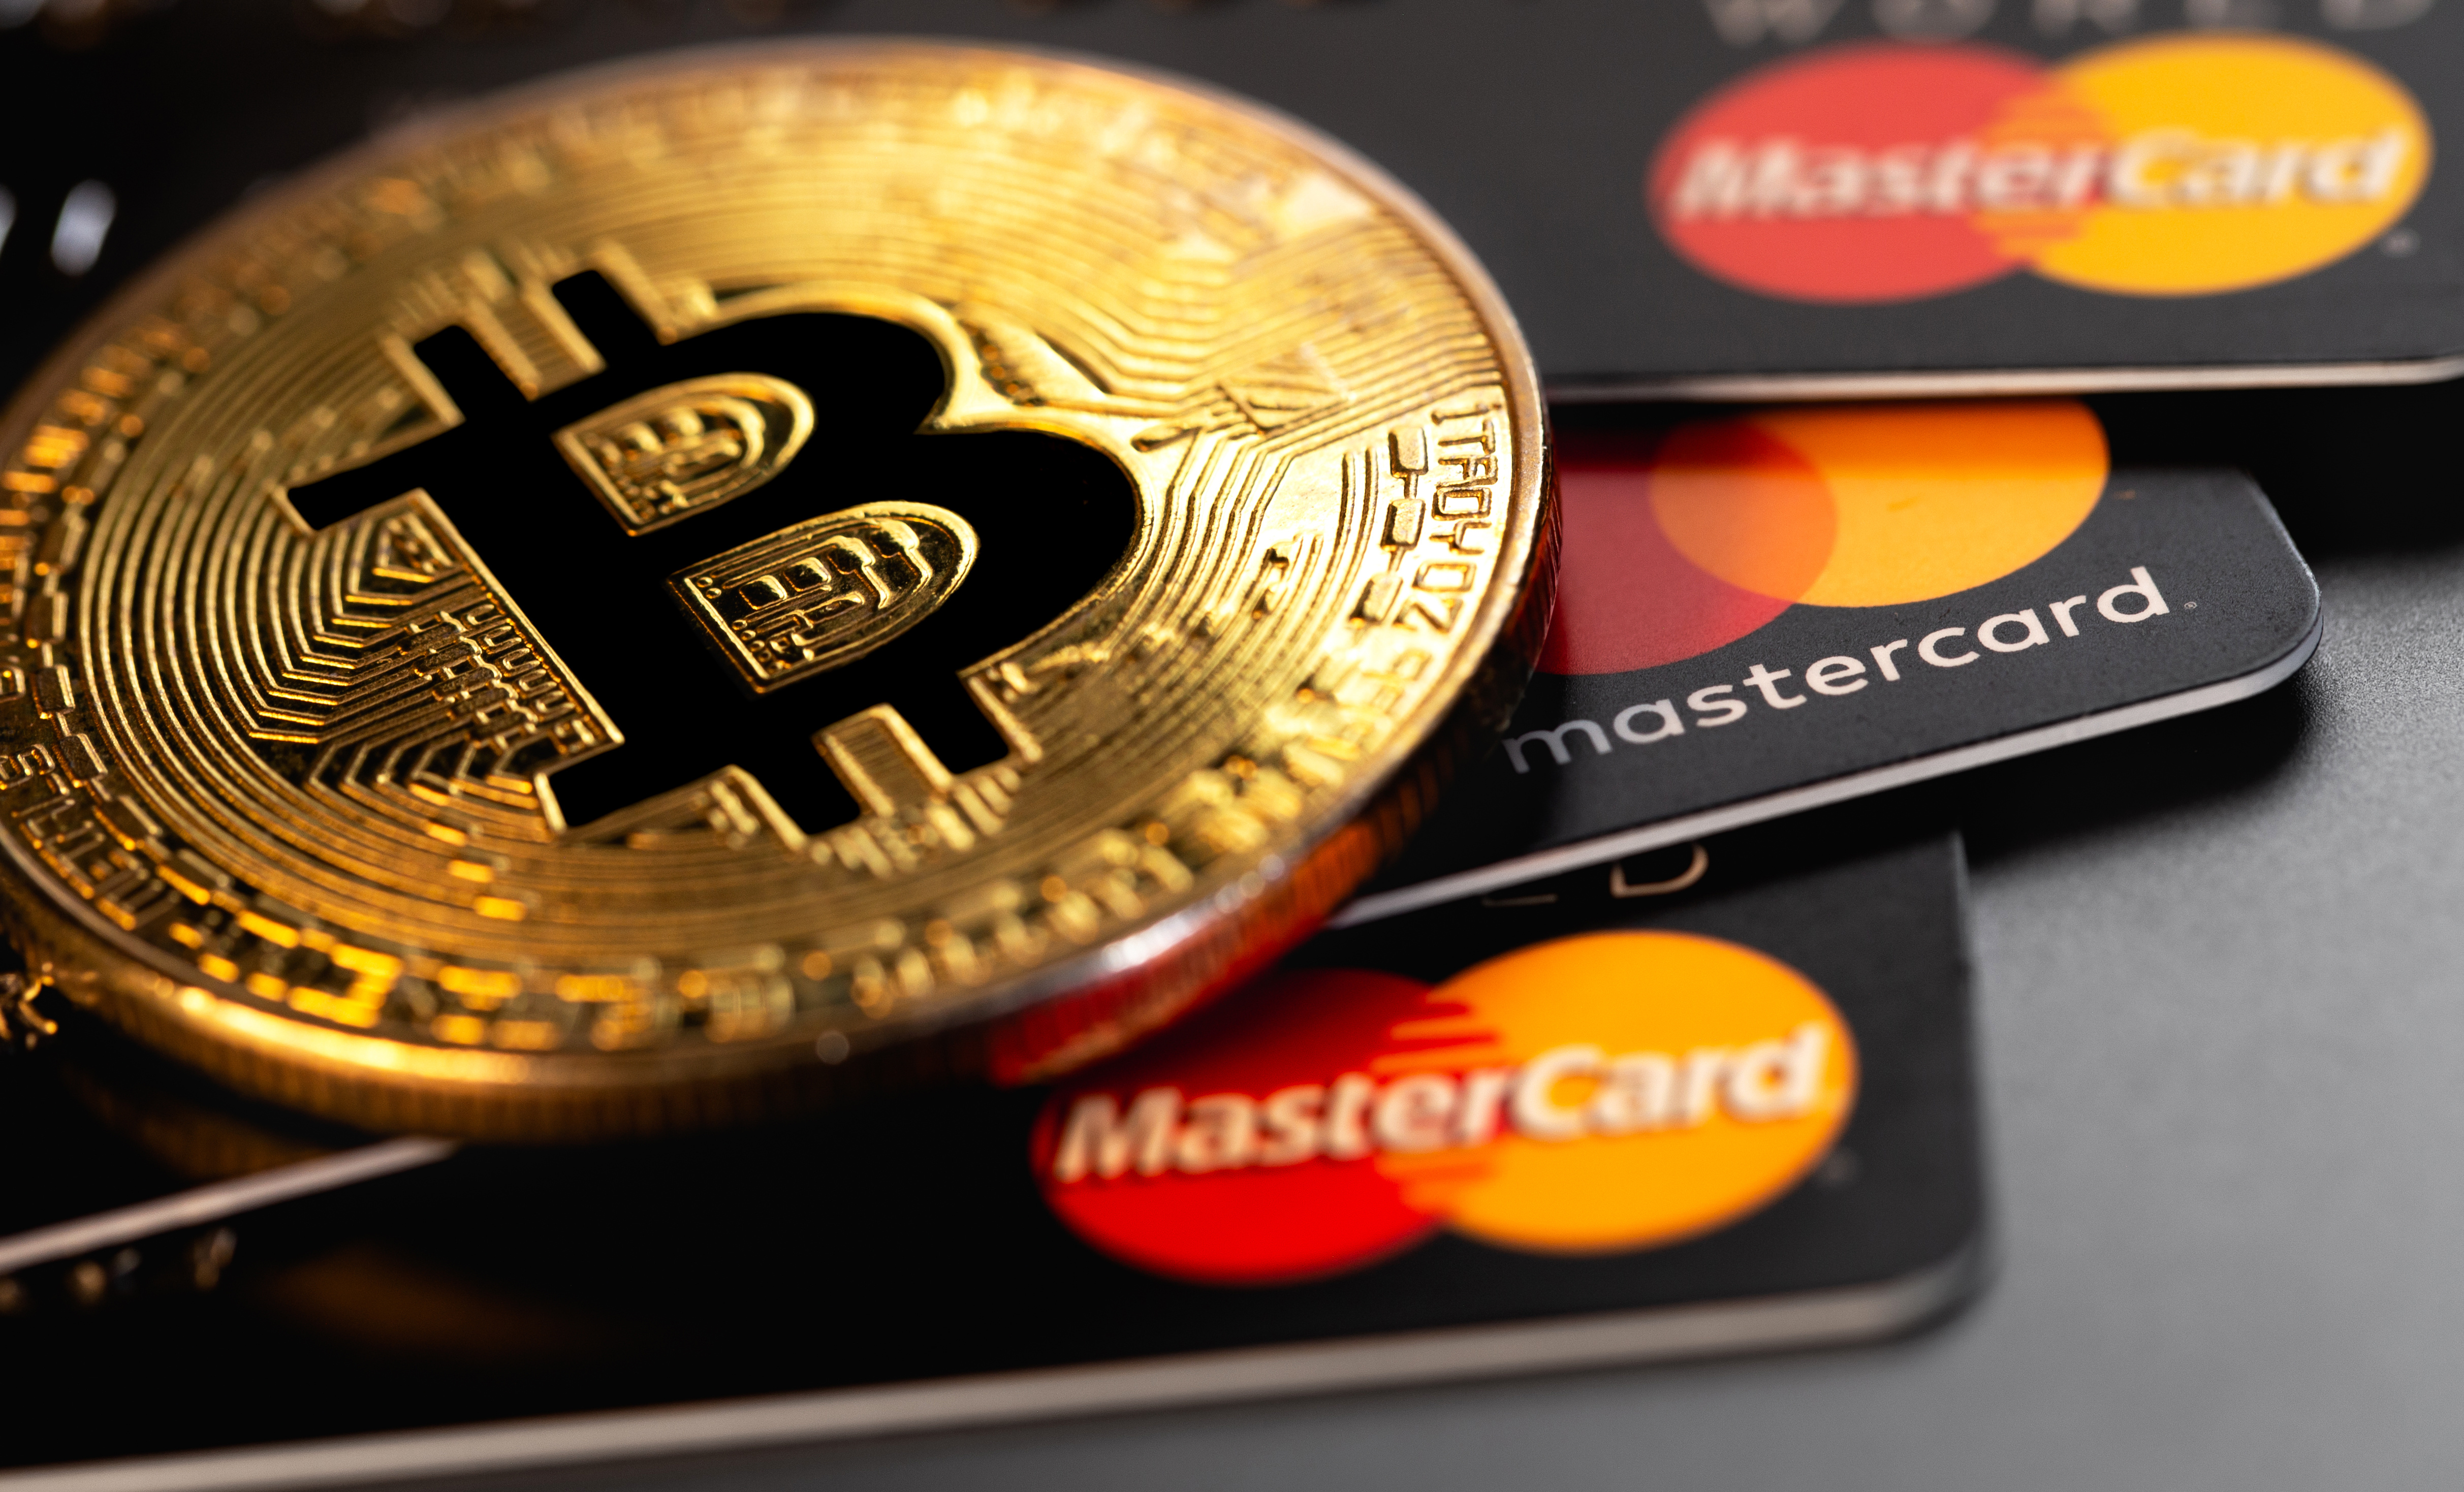 A bit coin and mastercard